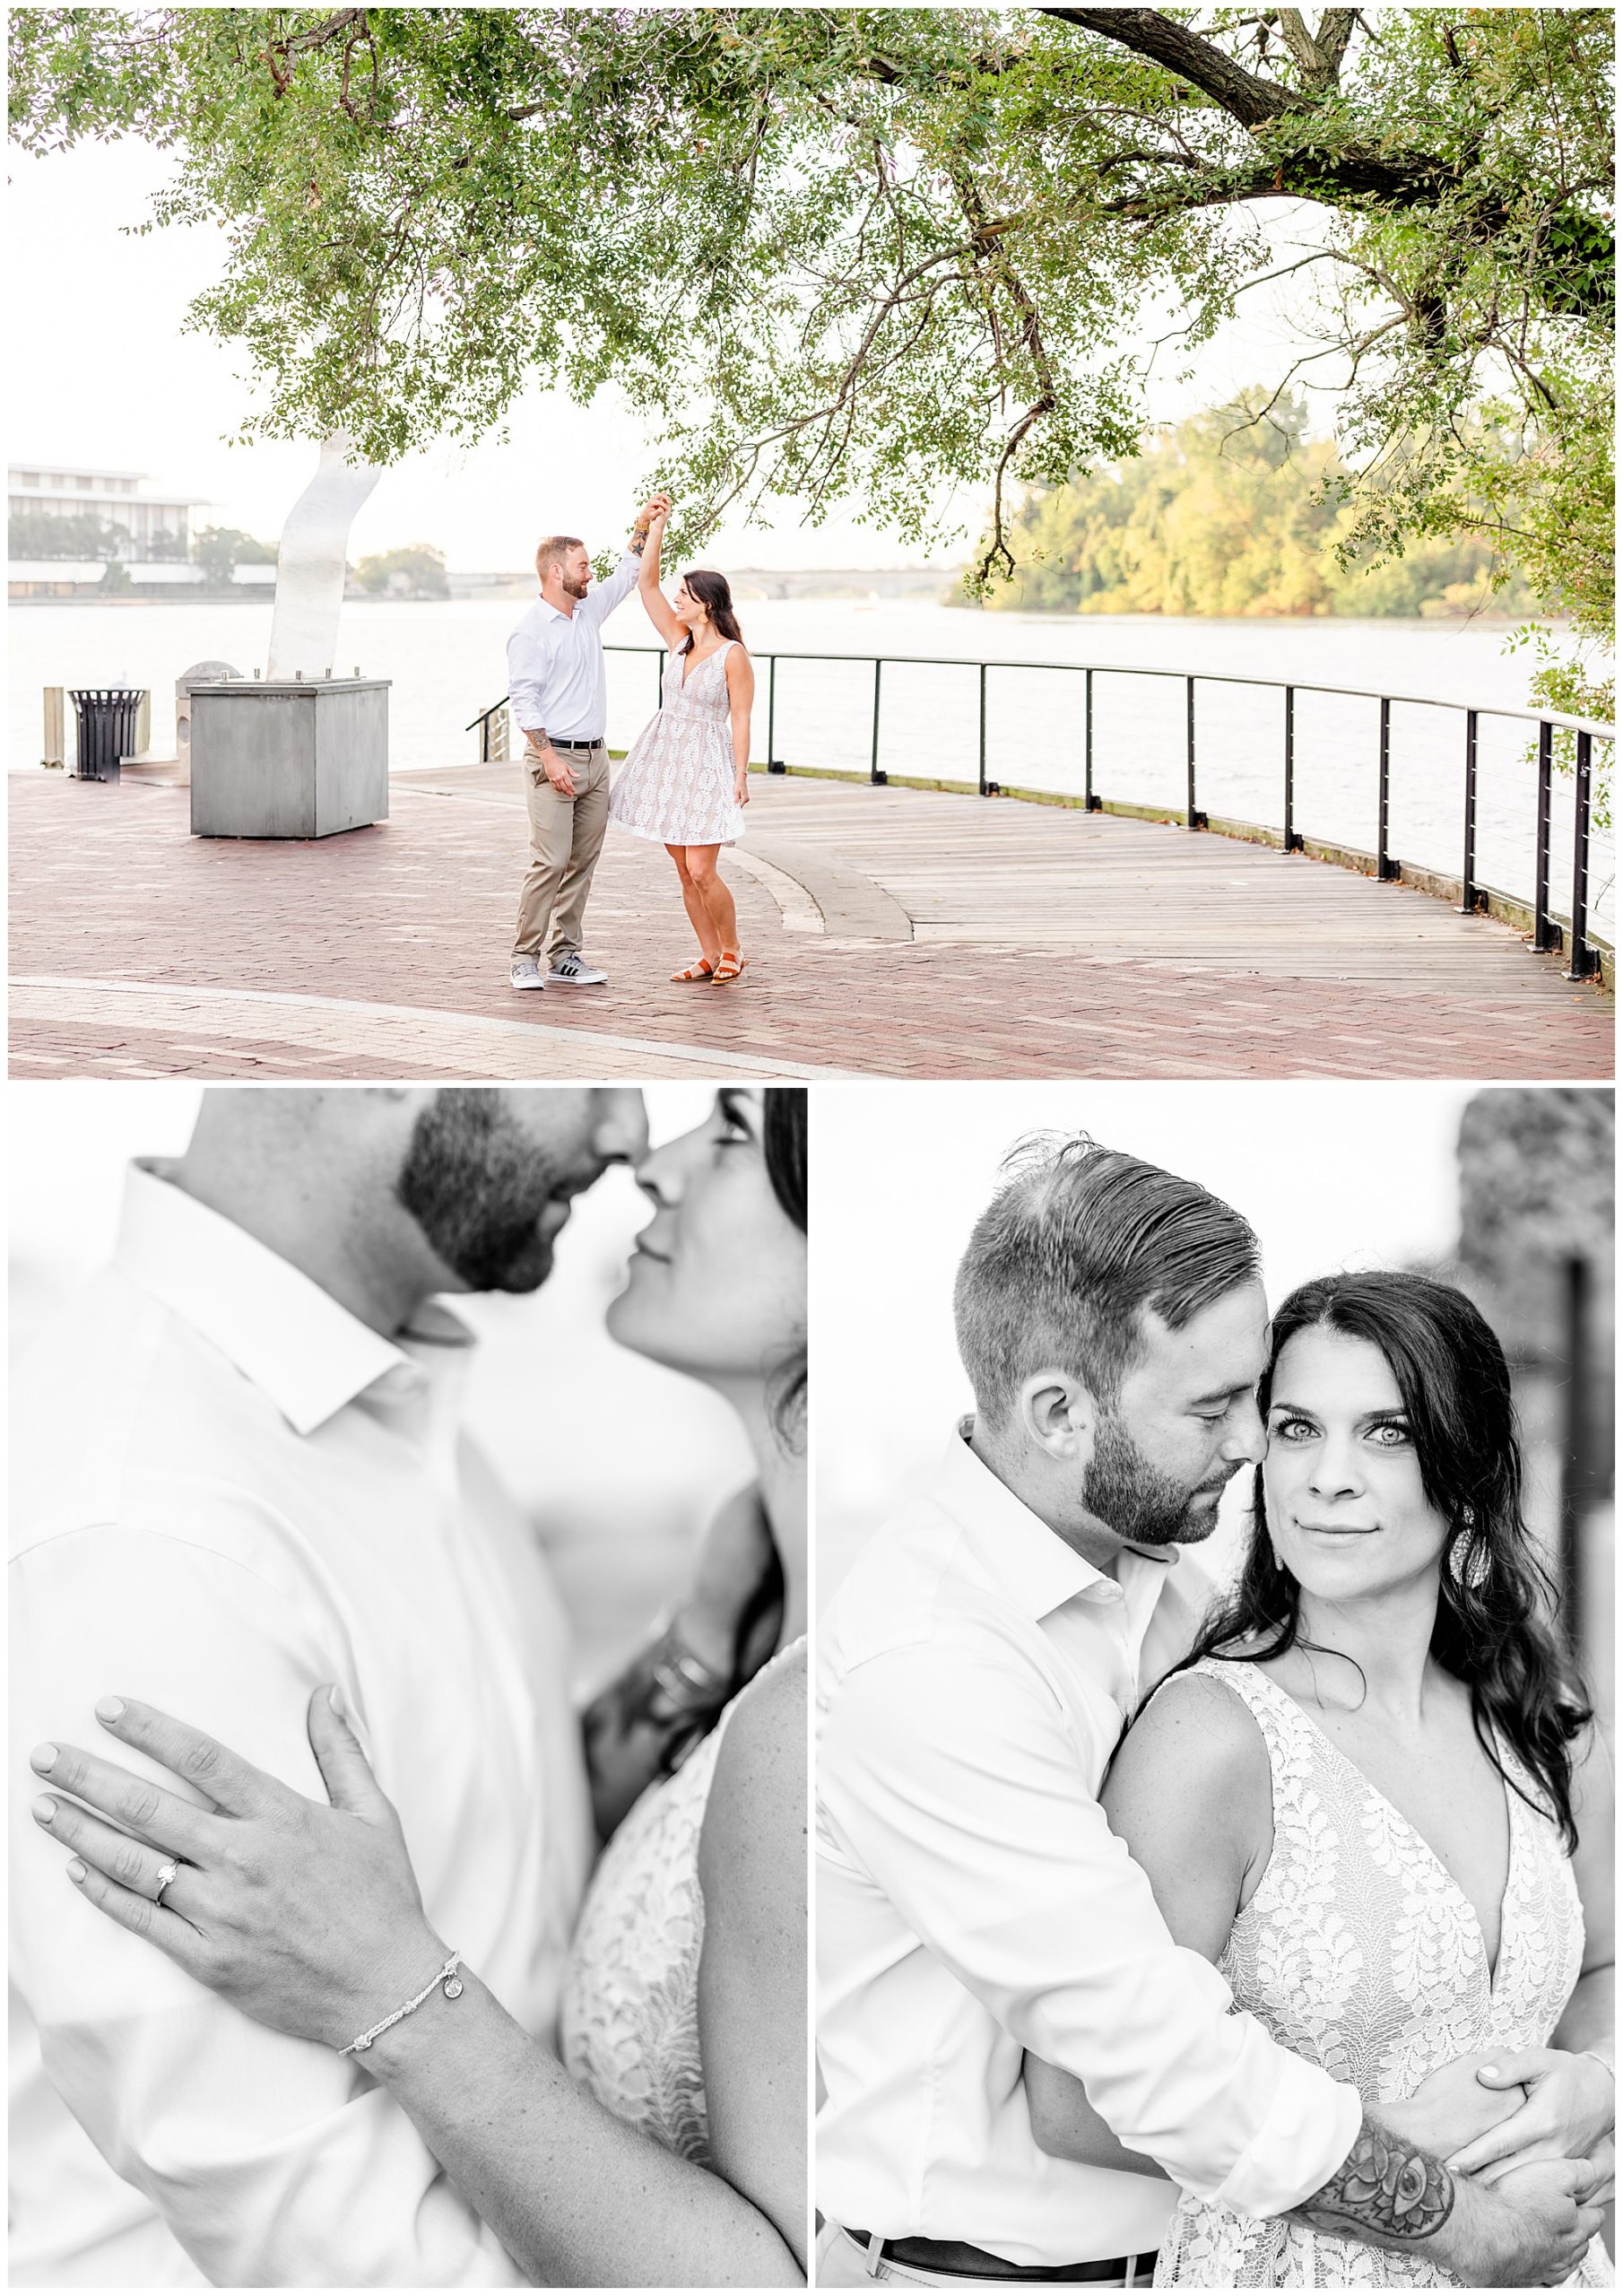 Georgetown waterfront engagement session, Georgetown engagement photos, Georgetown wedding photographer, DC wedding photographer, waterfront engagement photos, Georgetown waterfront engagement photos, DC engagement photos, Rachel E.H. Photography, summer engagement photos, black and white, woman wearing engagement ring, man twirling woman 